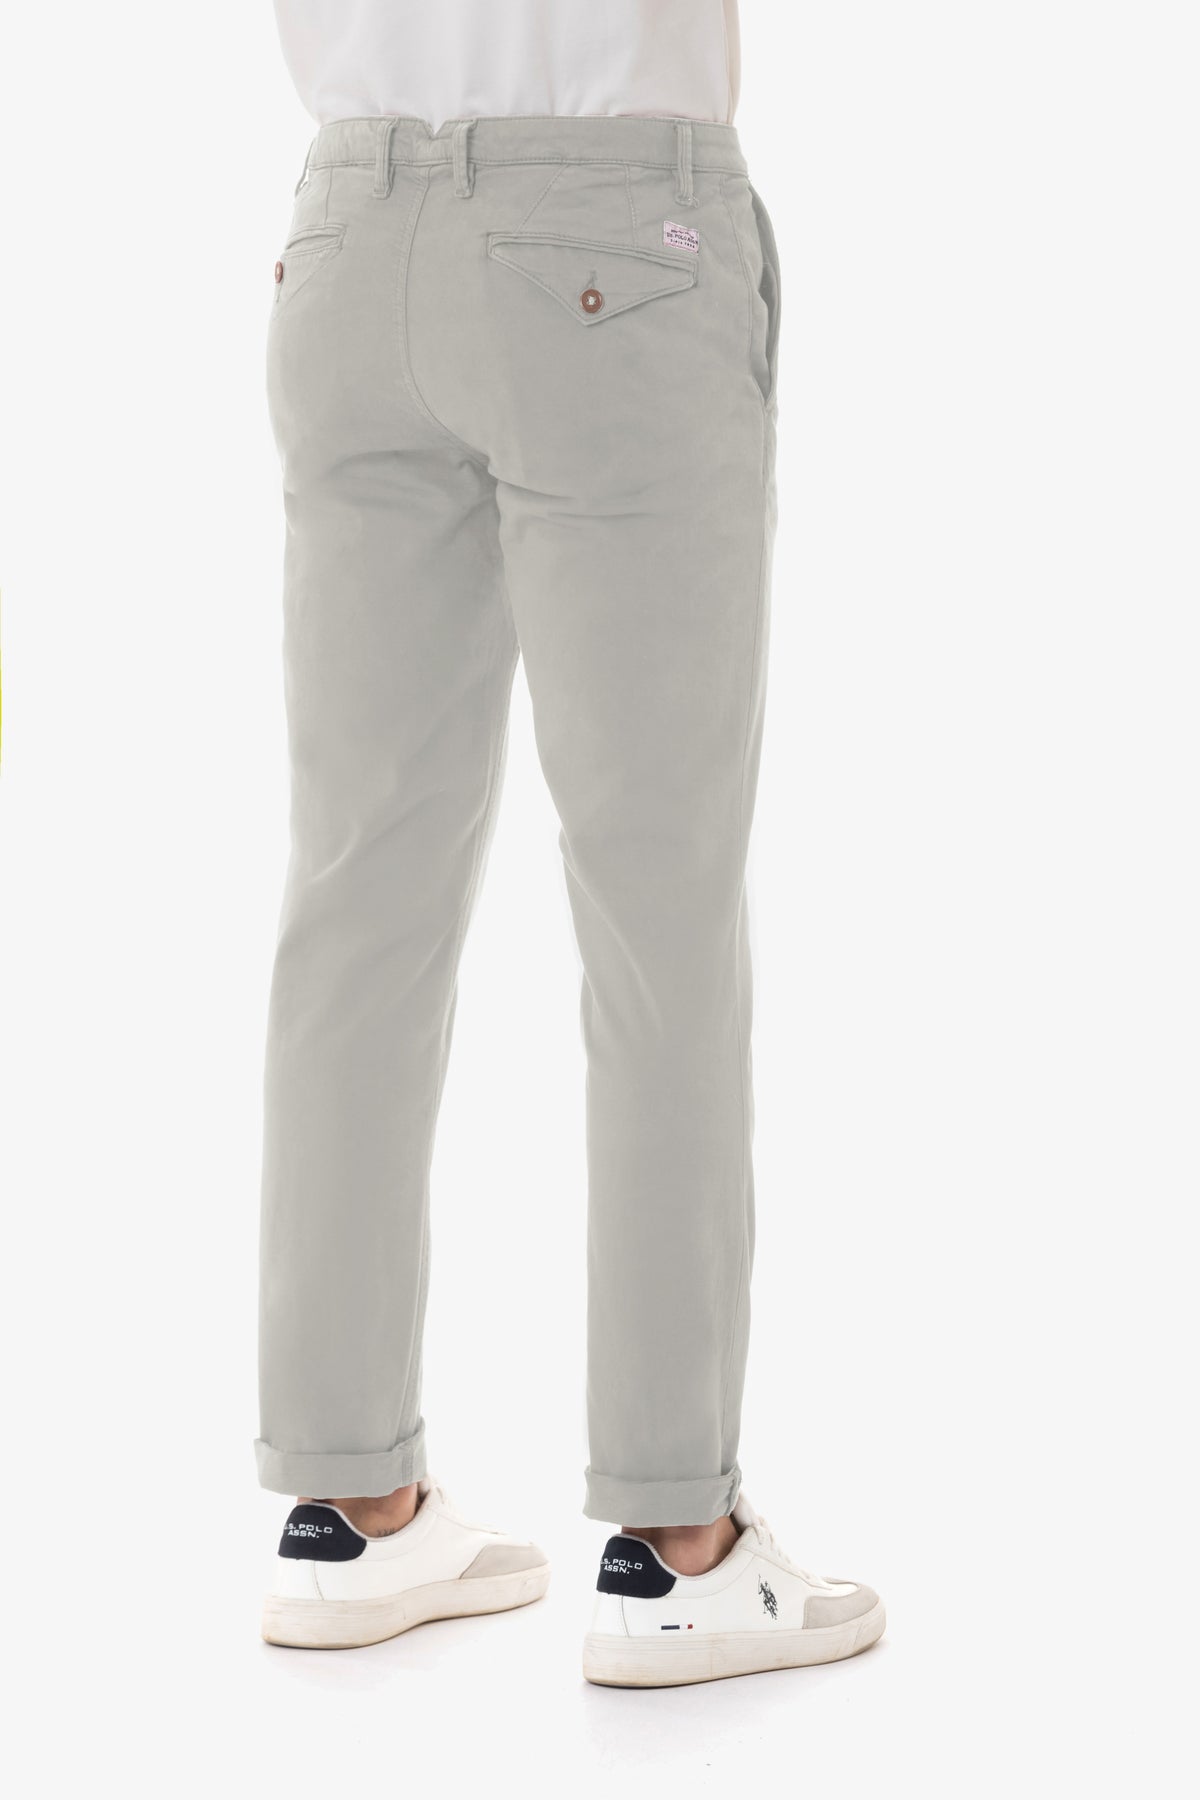 Pantalone chino in velluto a coste U.S. Polo Assn.